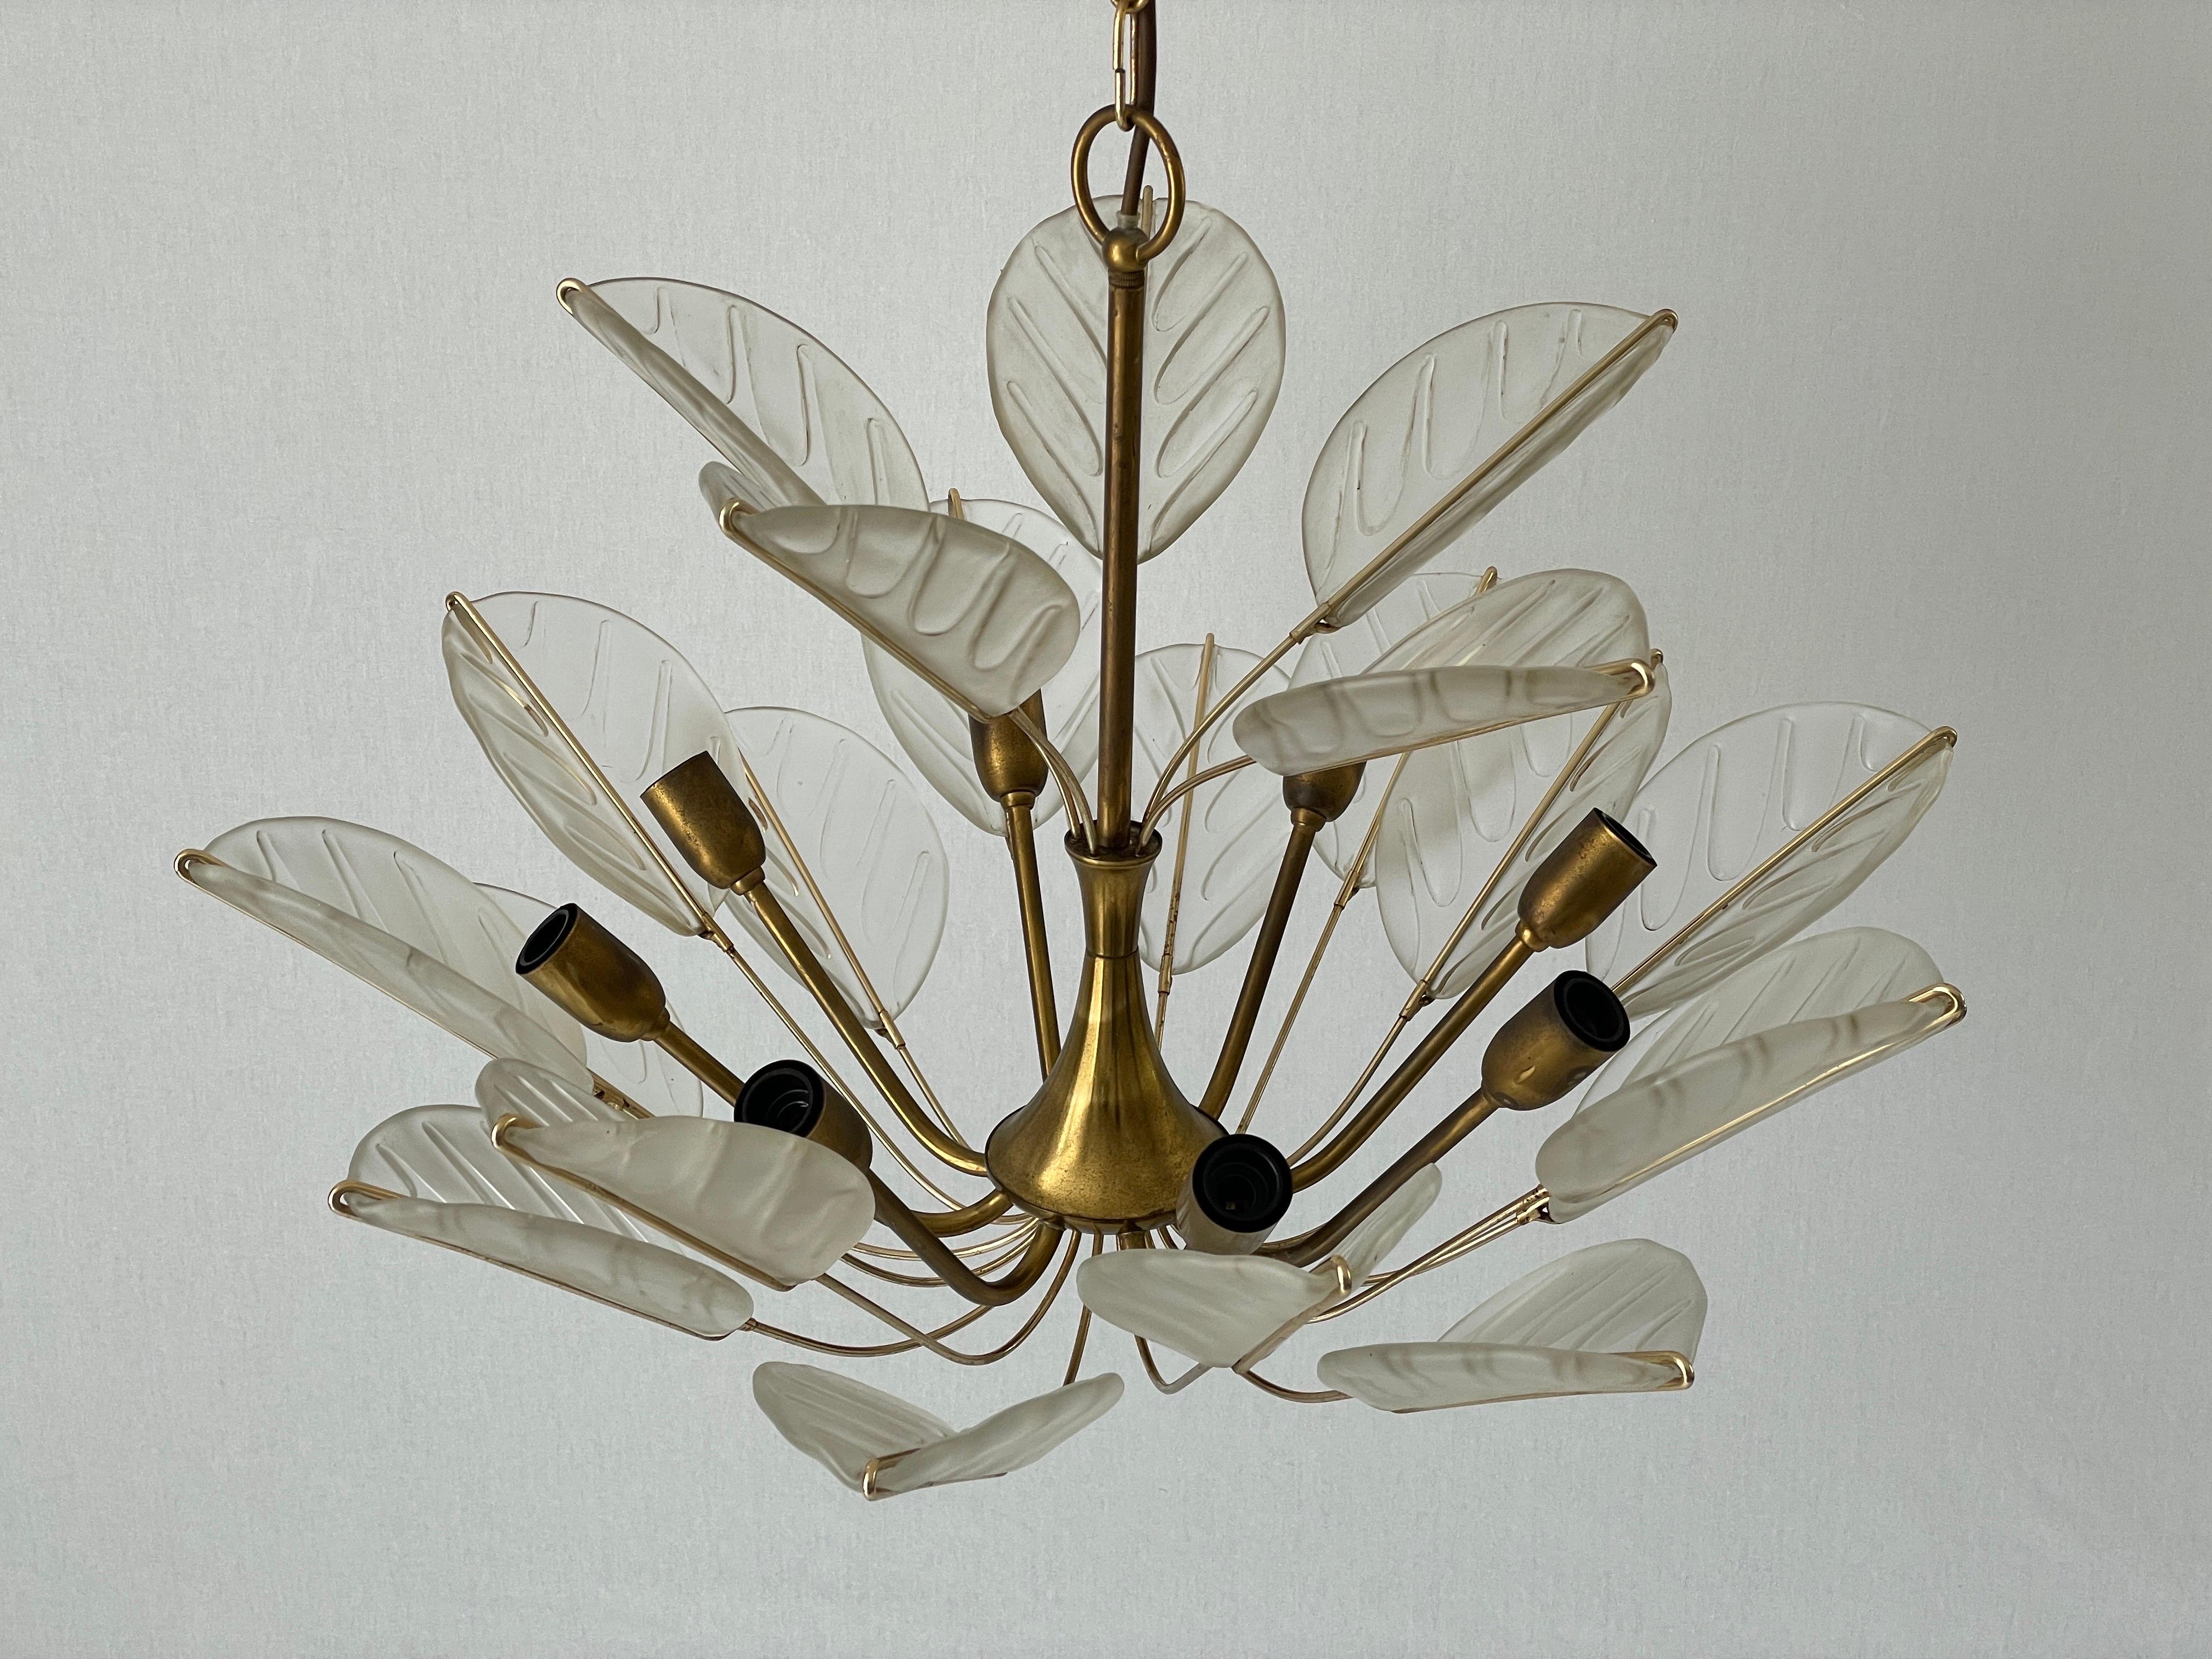 Luxurious 8-armed Brass Chandelier with Crystal Glass Leaves, 1960s, Germany

Lampshade is in very good vintage condition.

This lamp works with  8x E14 light bulbs. 
Wired and suitable to use with 220V and 110V for all